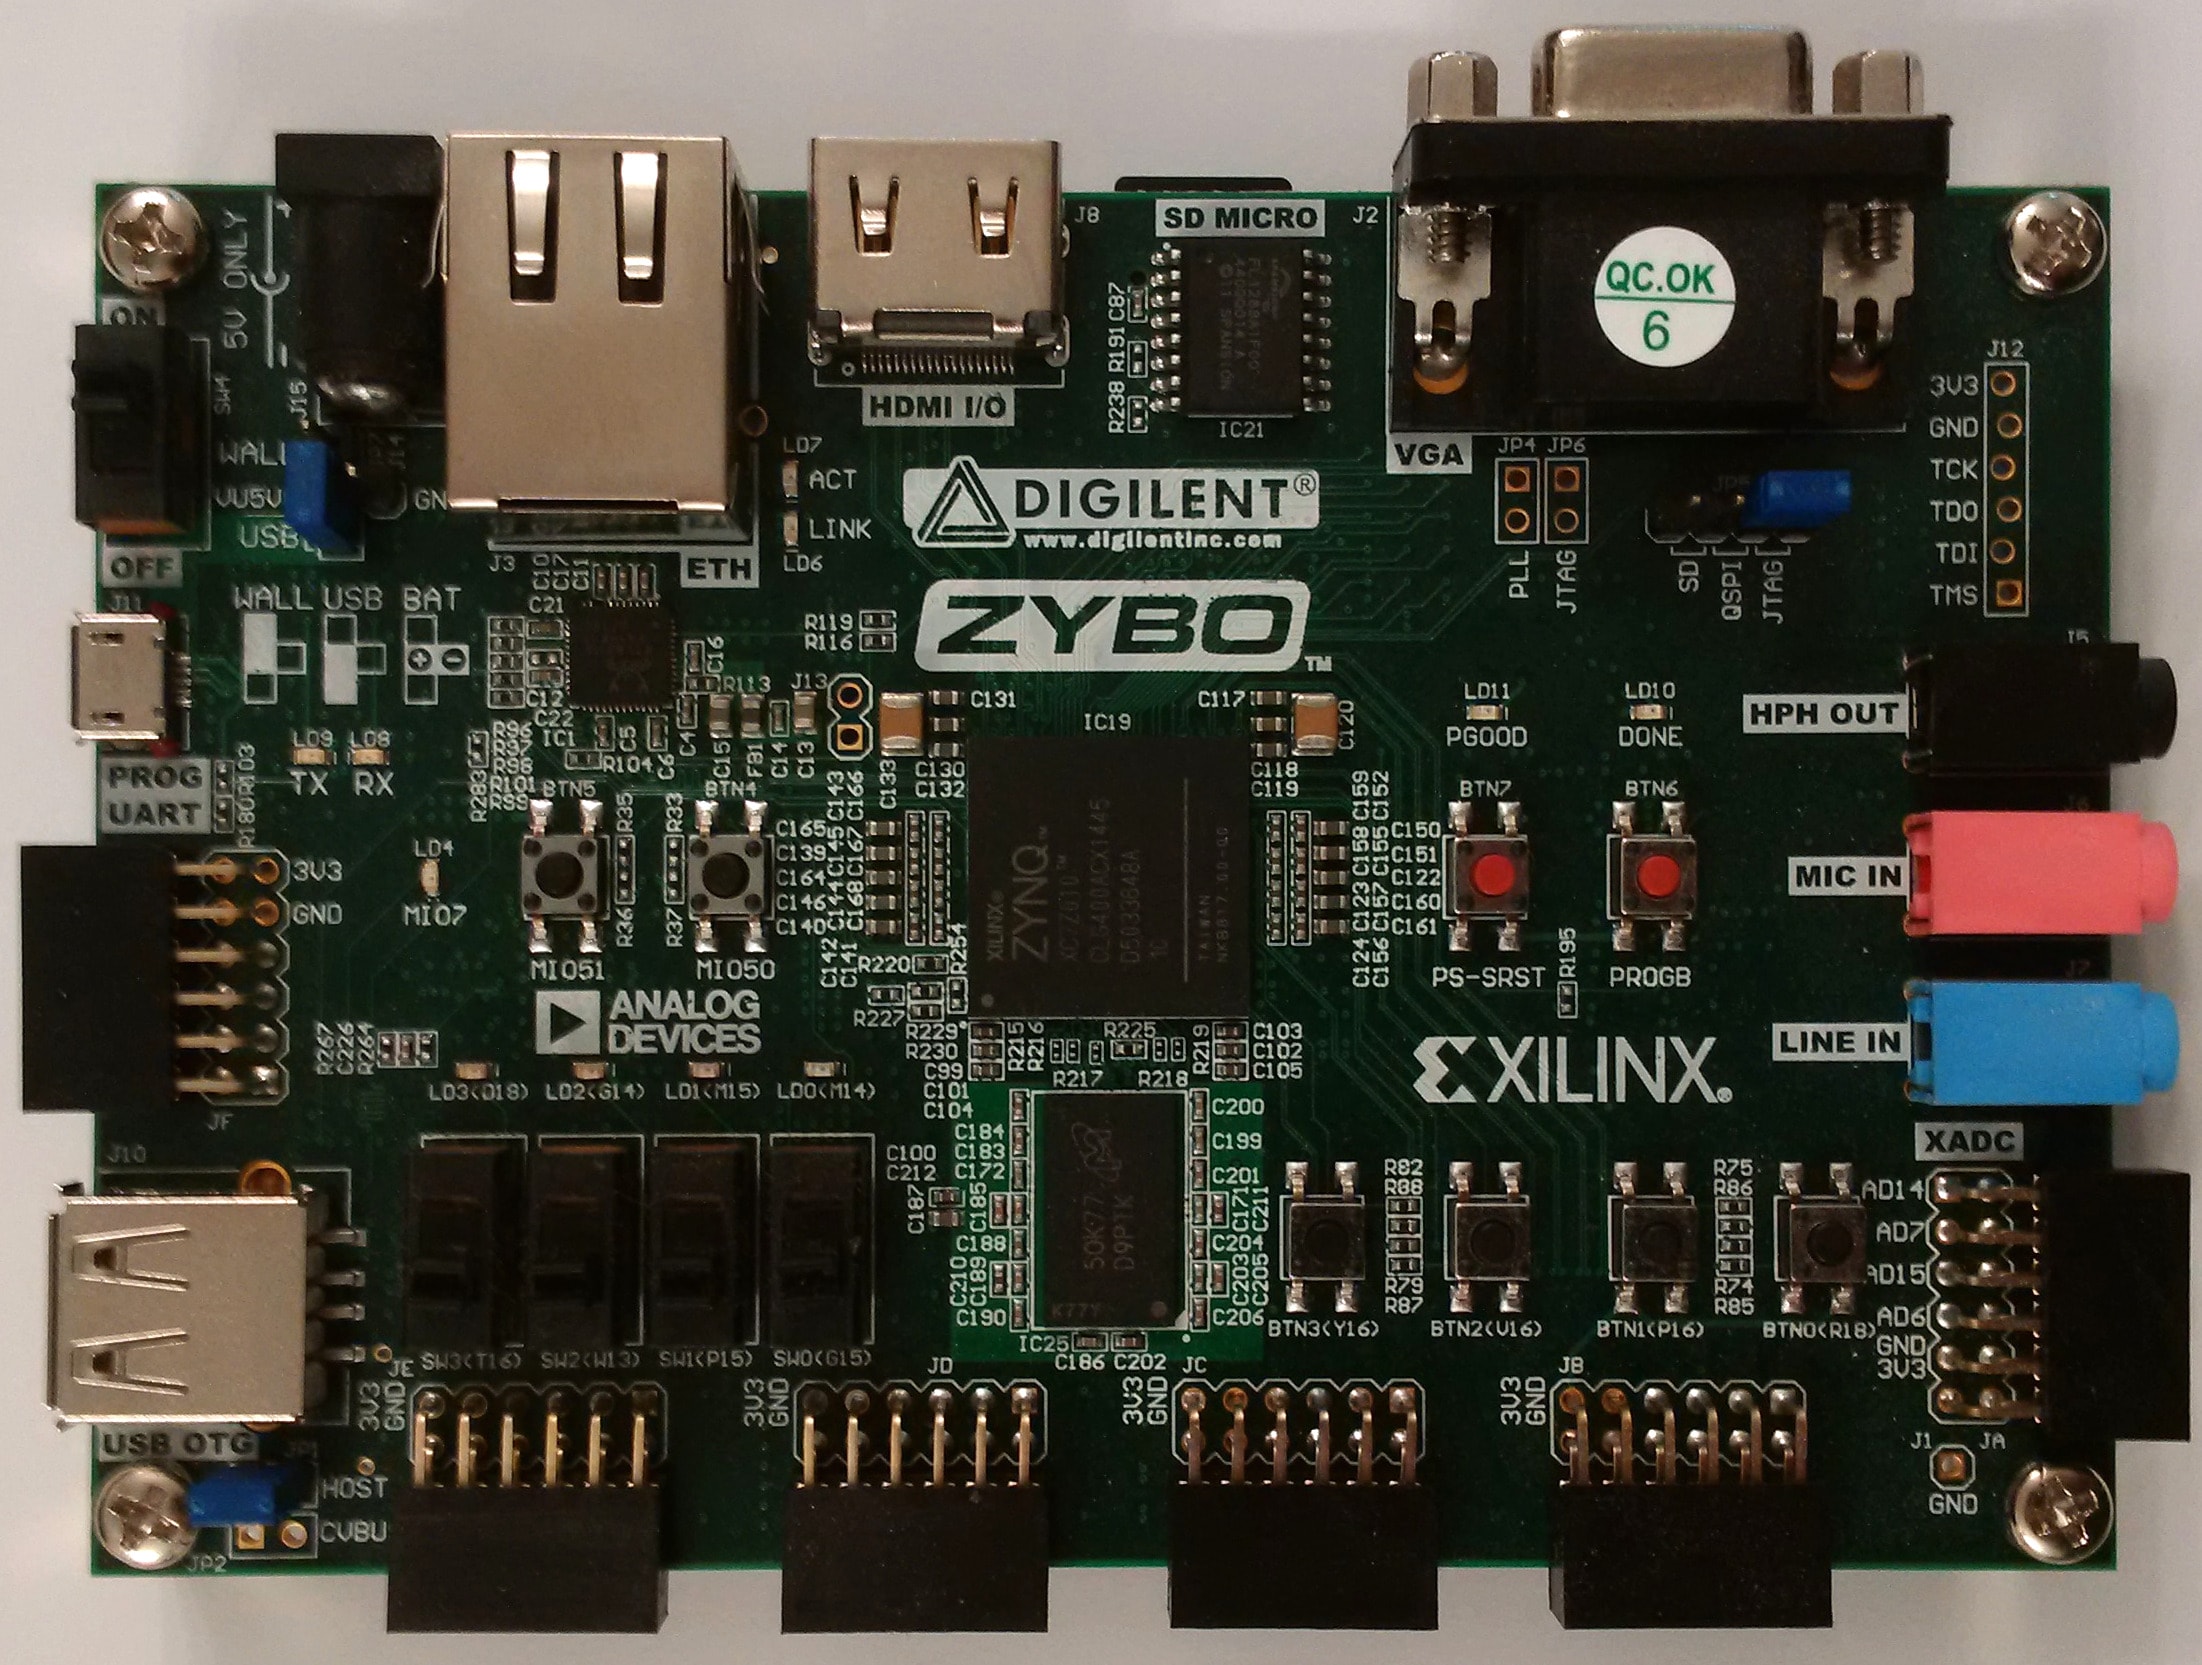 Digilent ZYBO development board with the Xilinx Zynq-7000 system on chip and FPGA.